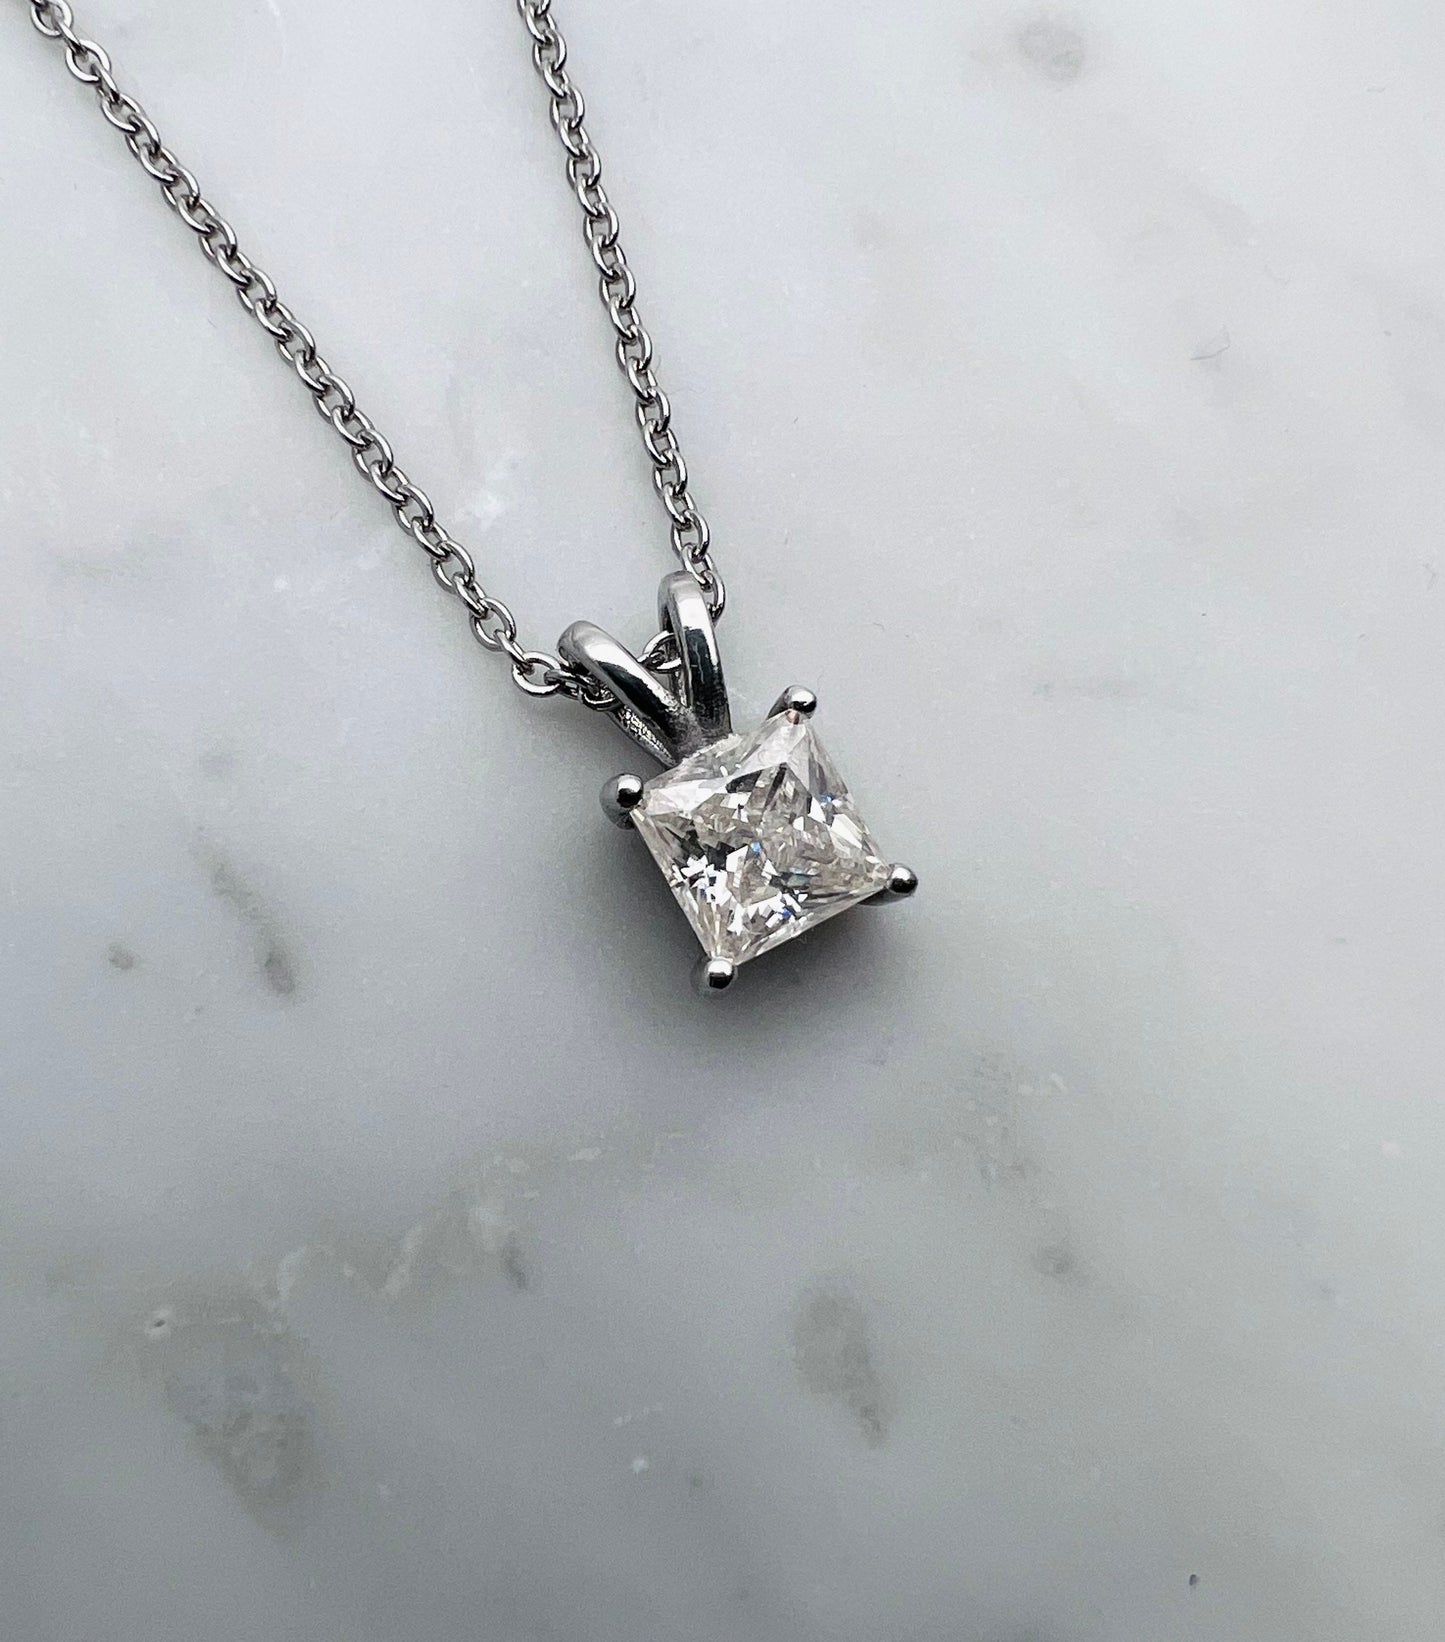 Genuine moissanite Princess cut titanium pendant necklace 5mm, 6mm, 7mm sizes and chain included